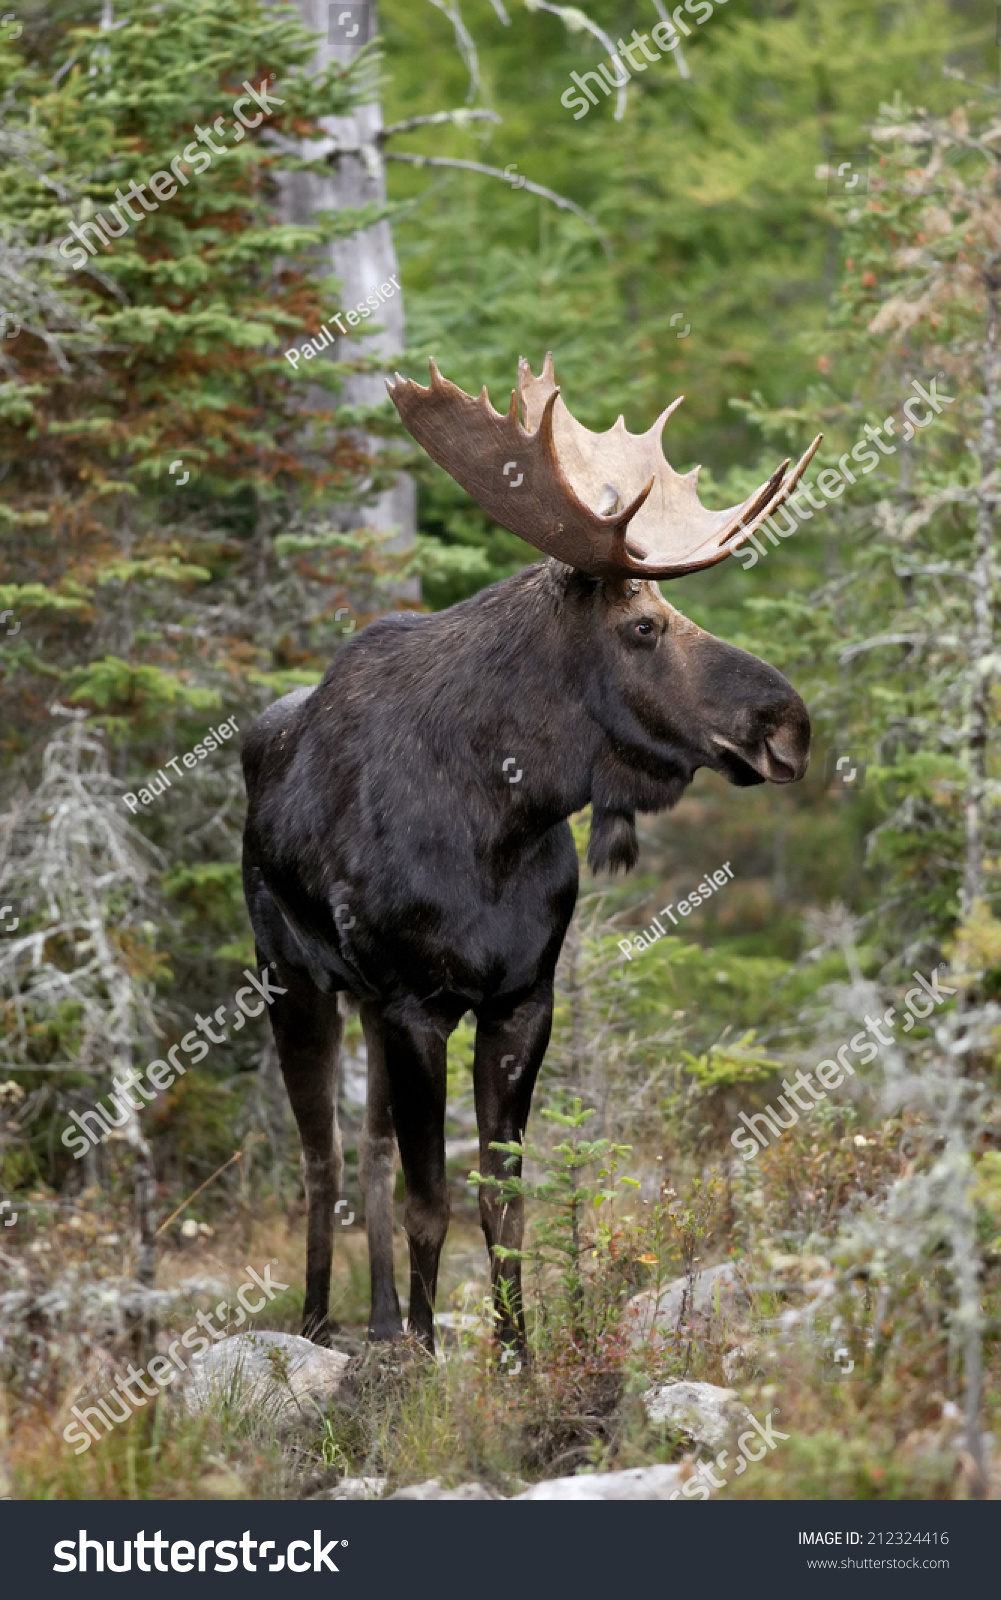 A portrait of a bull moose standing tall in the forest. #212324416